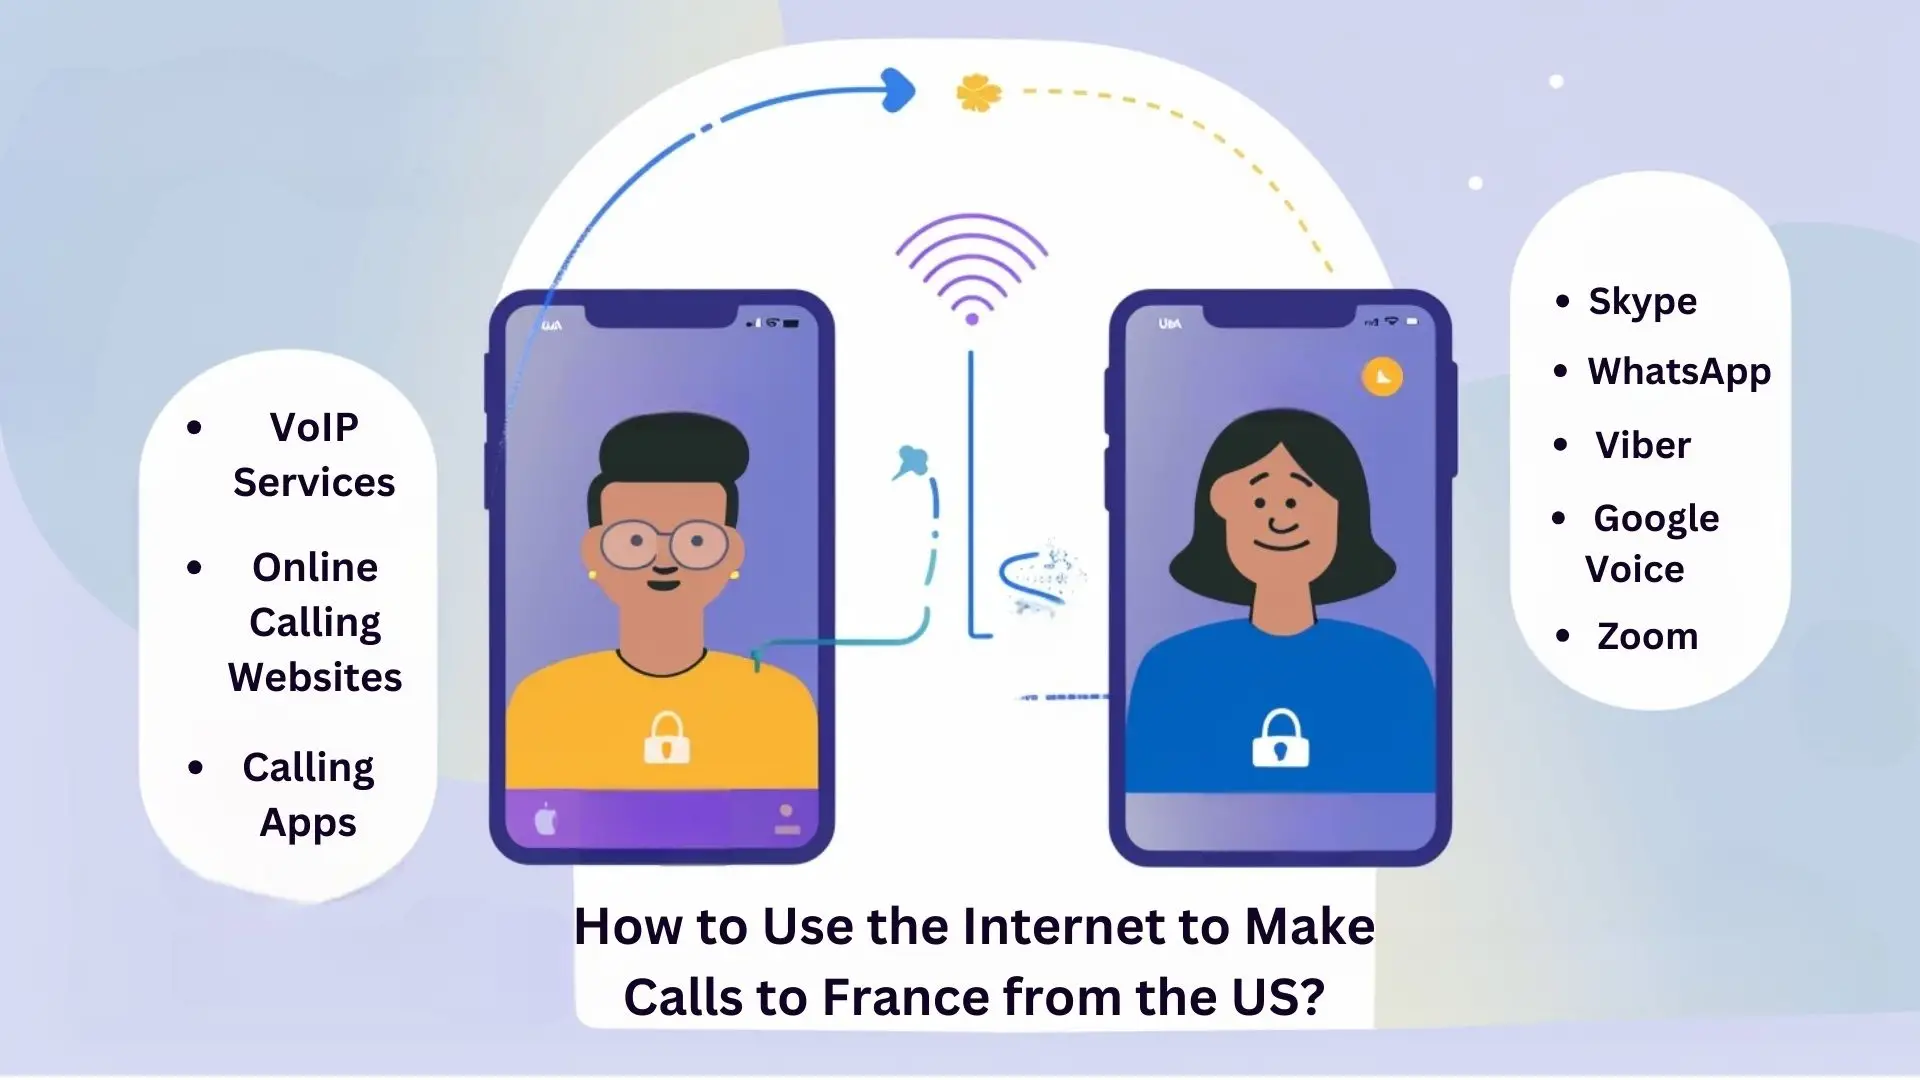 How to Use the Internet to Make Calls to France from the US